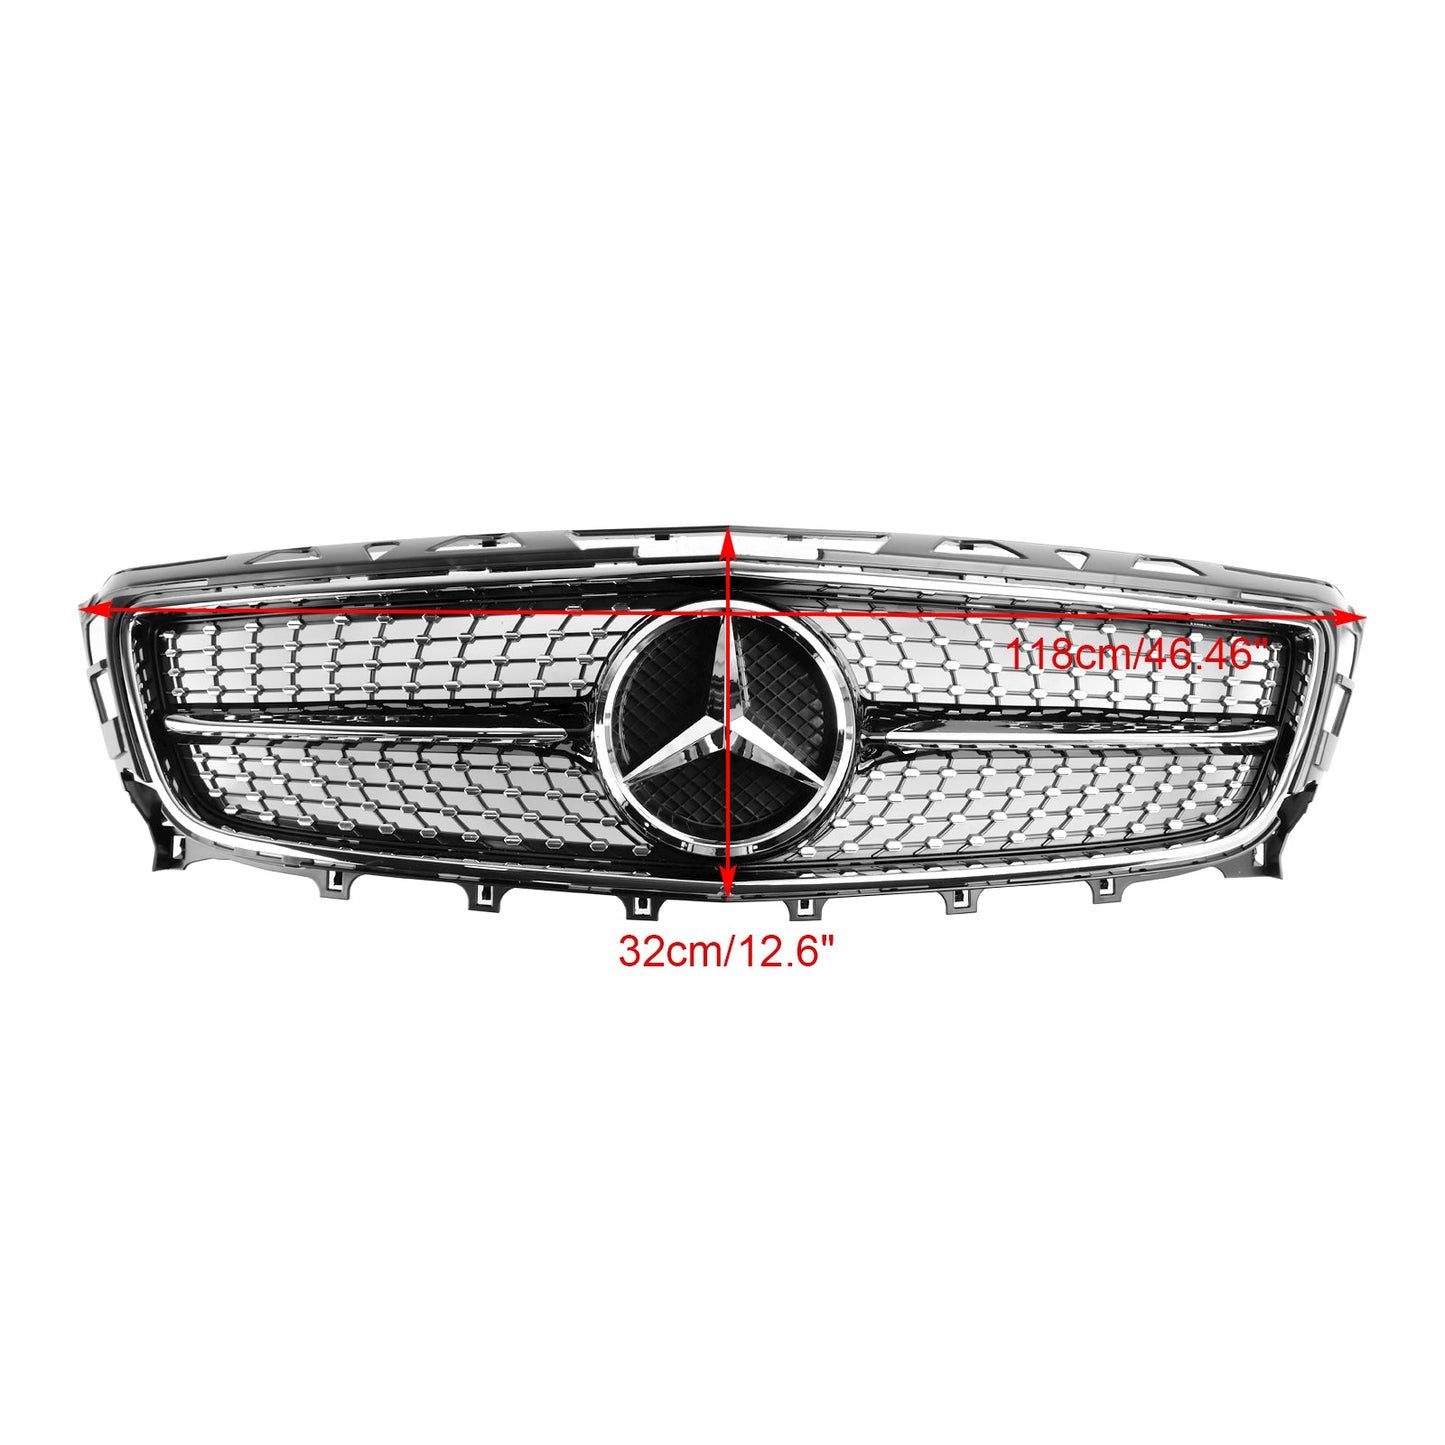 2011-2014 Mercedes-Benz W218 C218 X218 CLS-Class ClS350/500/550 Front Grill Grille